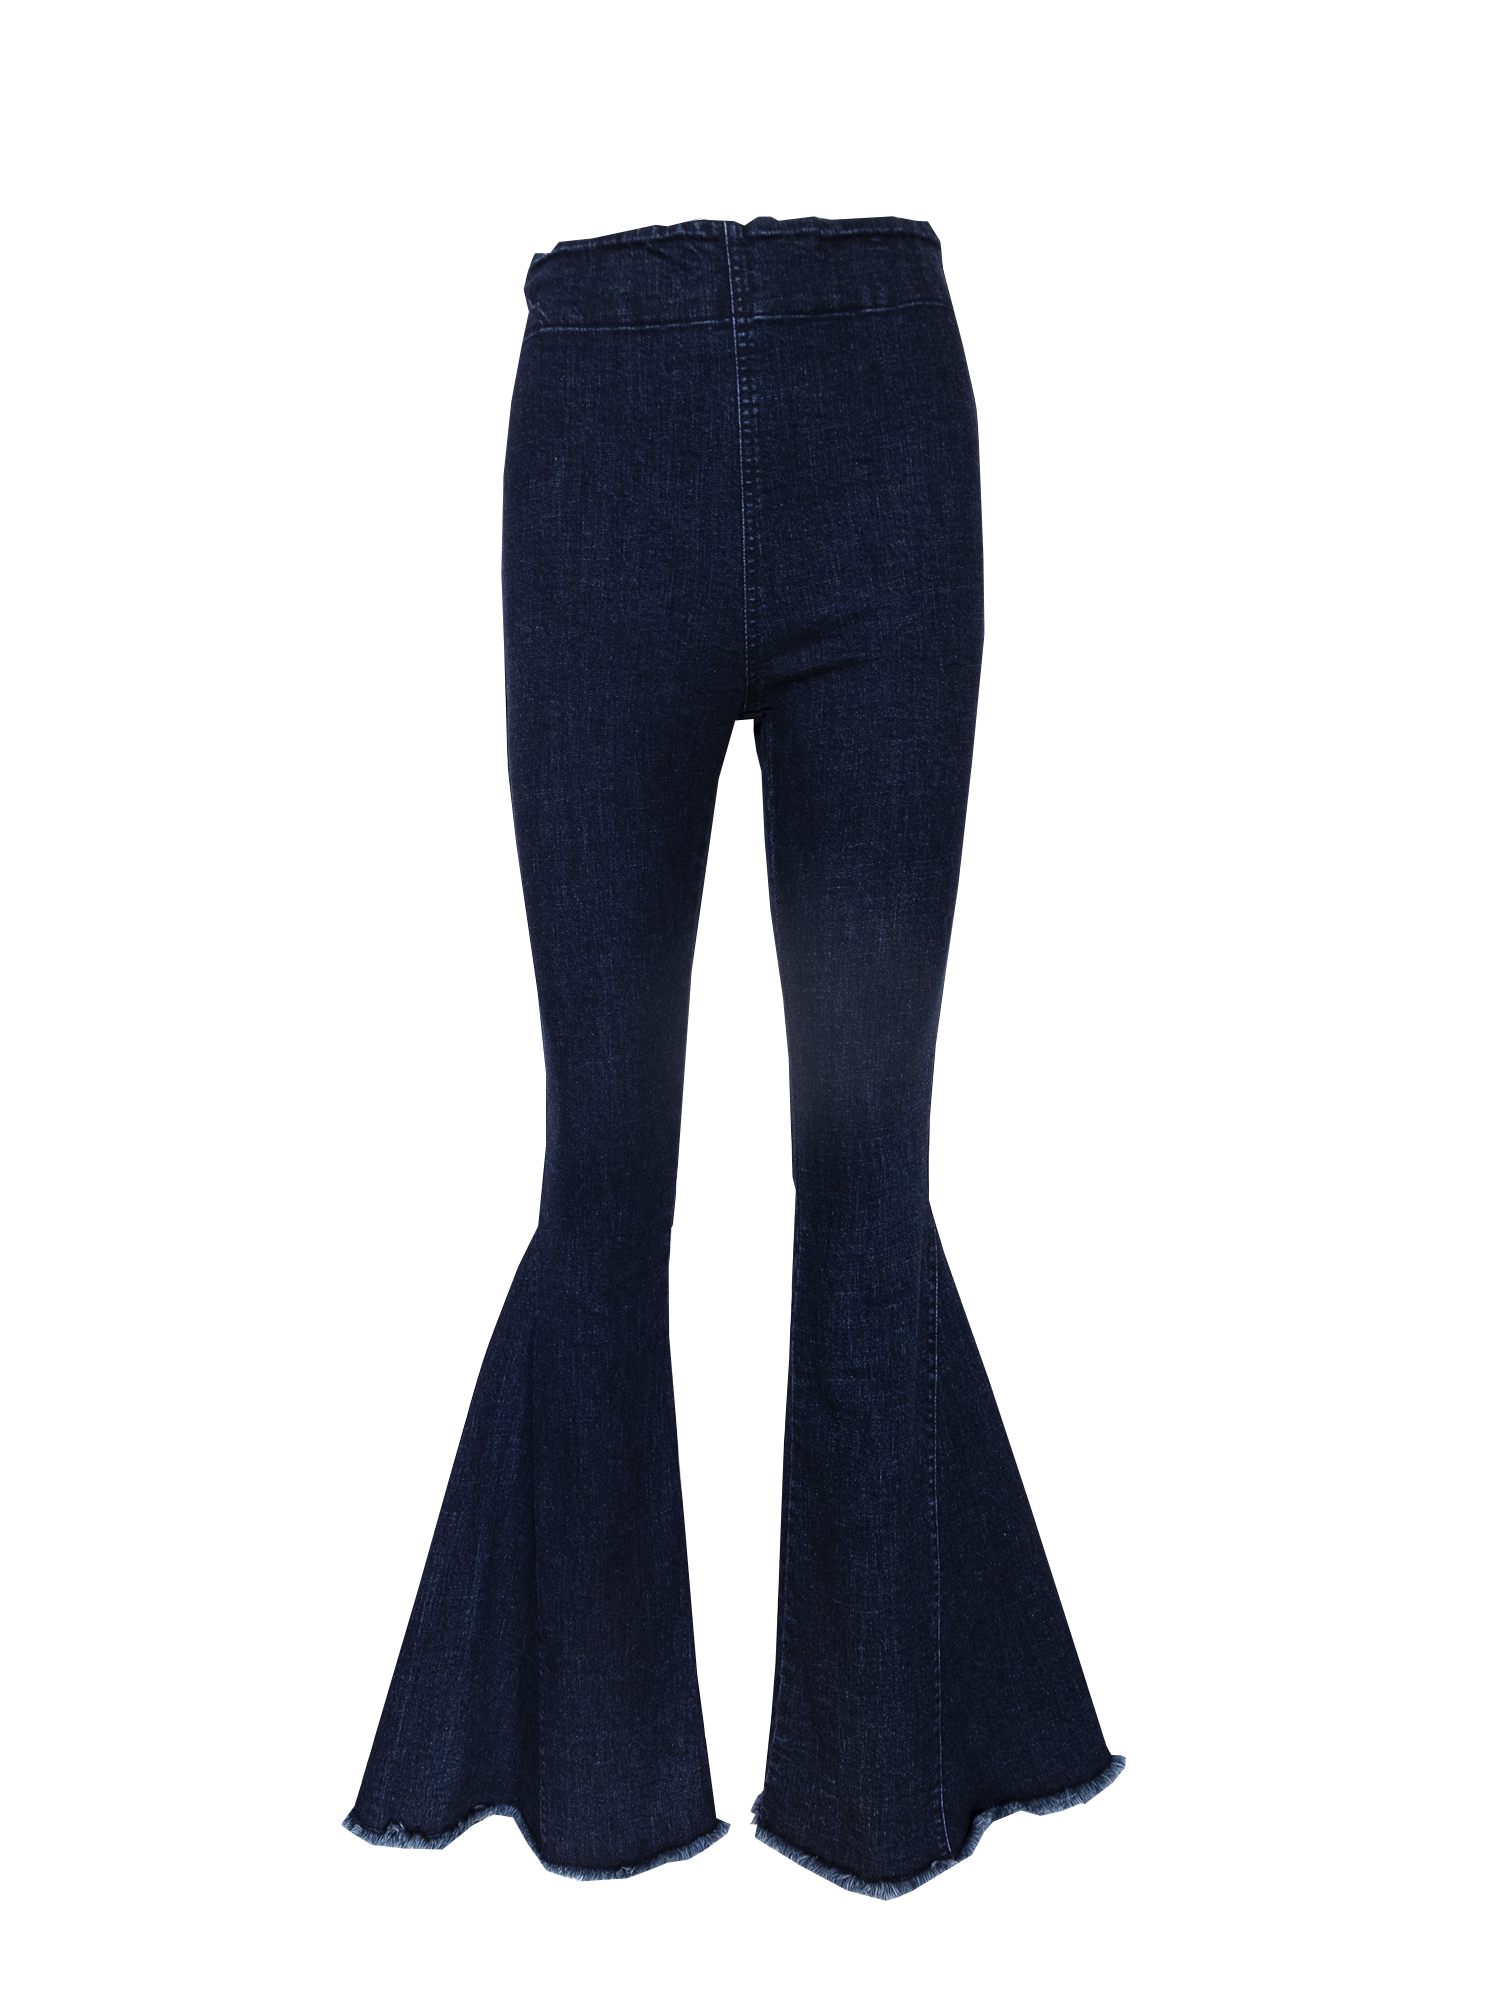 LOLISSIMA - flared trousers dark blue jeans